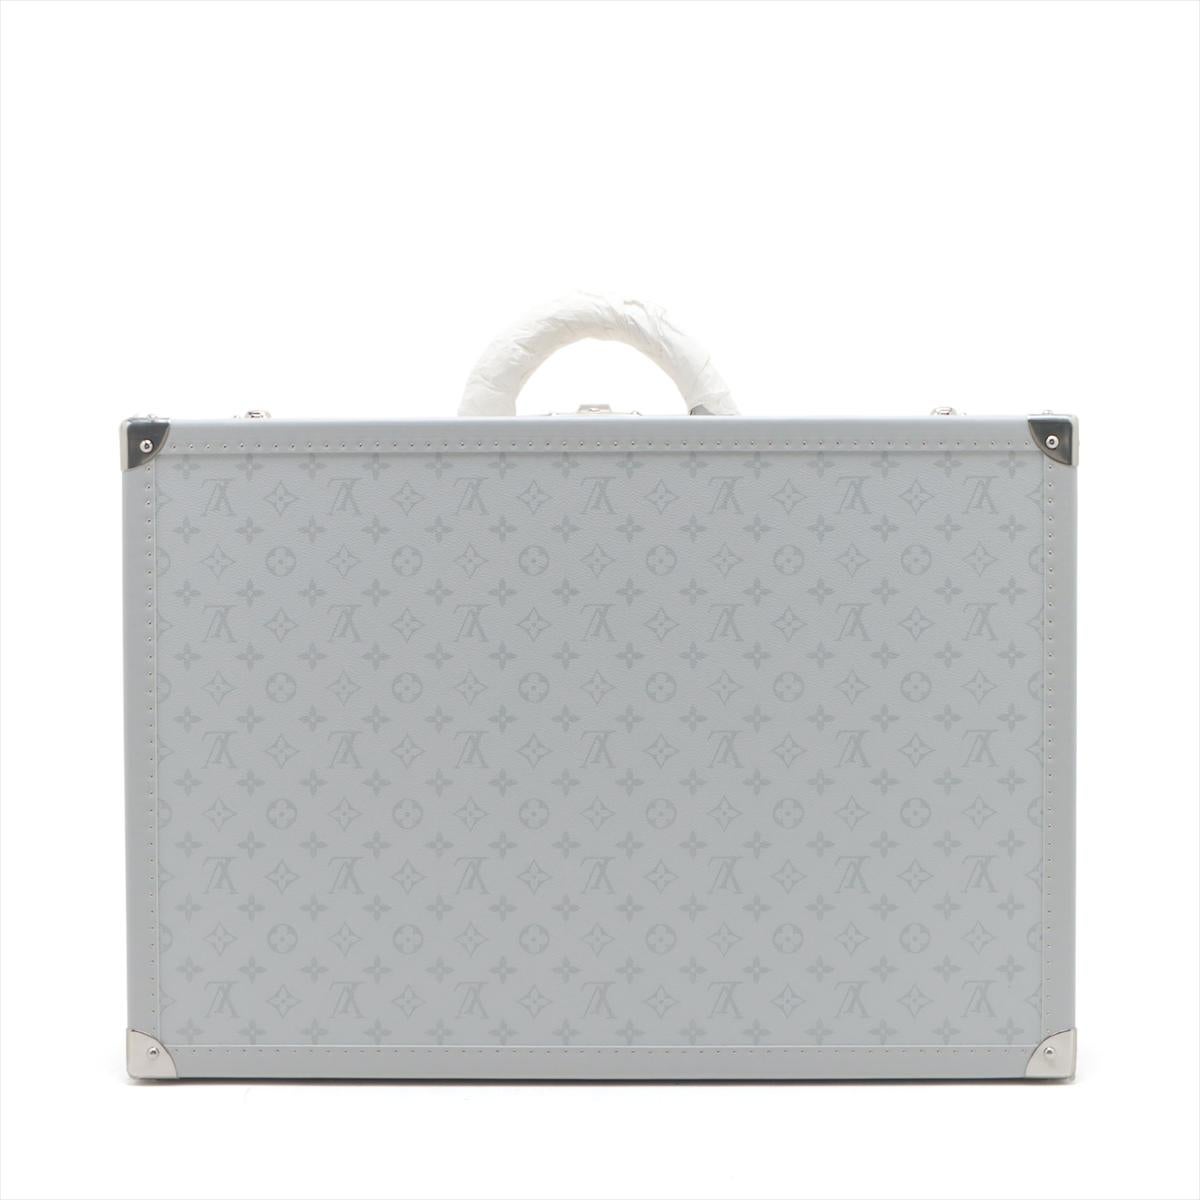 Brand: Louis Vuitton

Product: Monogram Taigarama Bisten 60 

Size: 61 x 45 x 18.5 cm  23.6 x 16.5 x 7.1 inches

Colour: White

Material: Taiga leather & Coated canvas

Hardware: Palladium brass metallic pieces

Condition:

Pristine: The product is